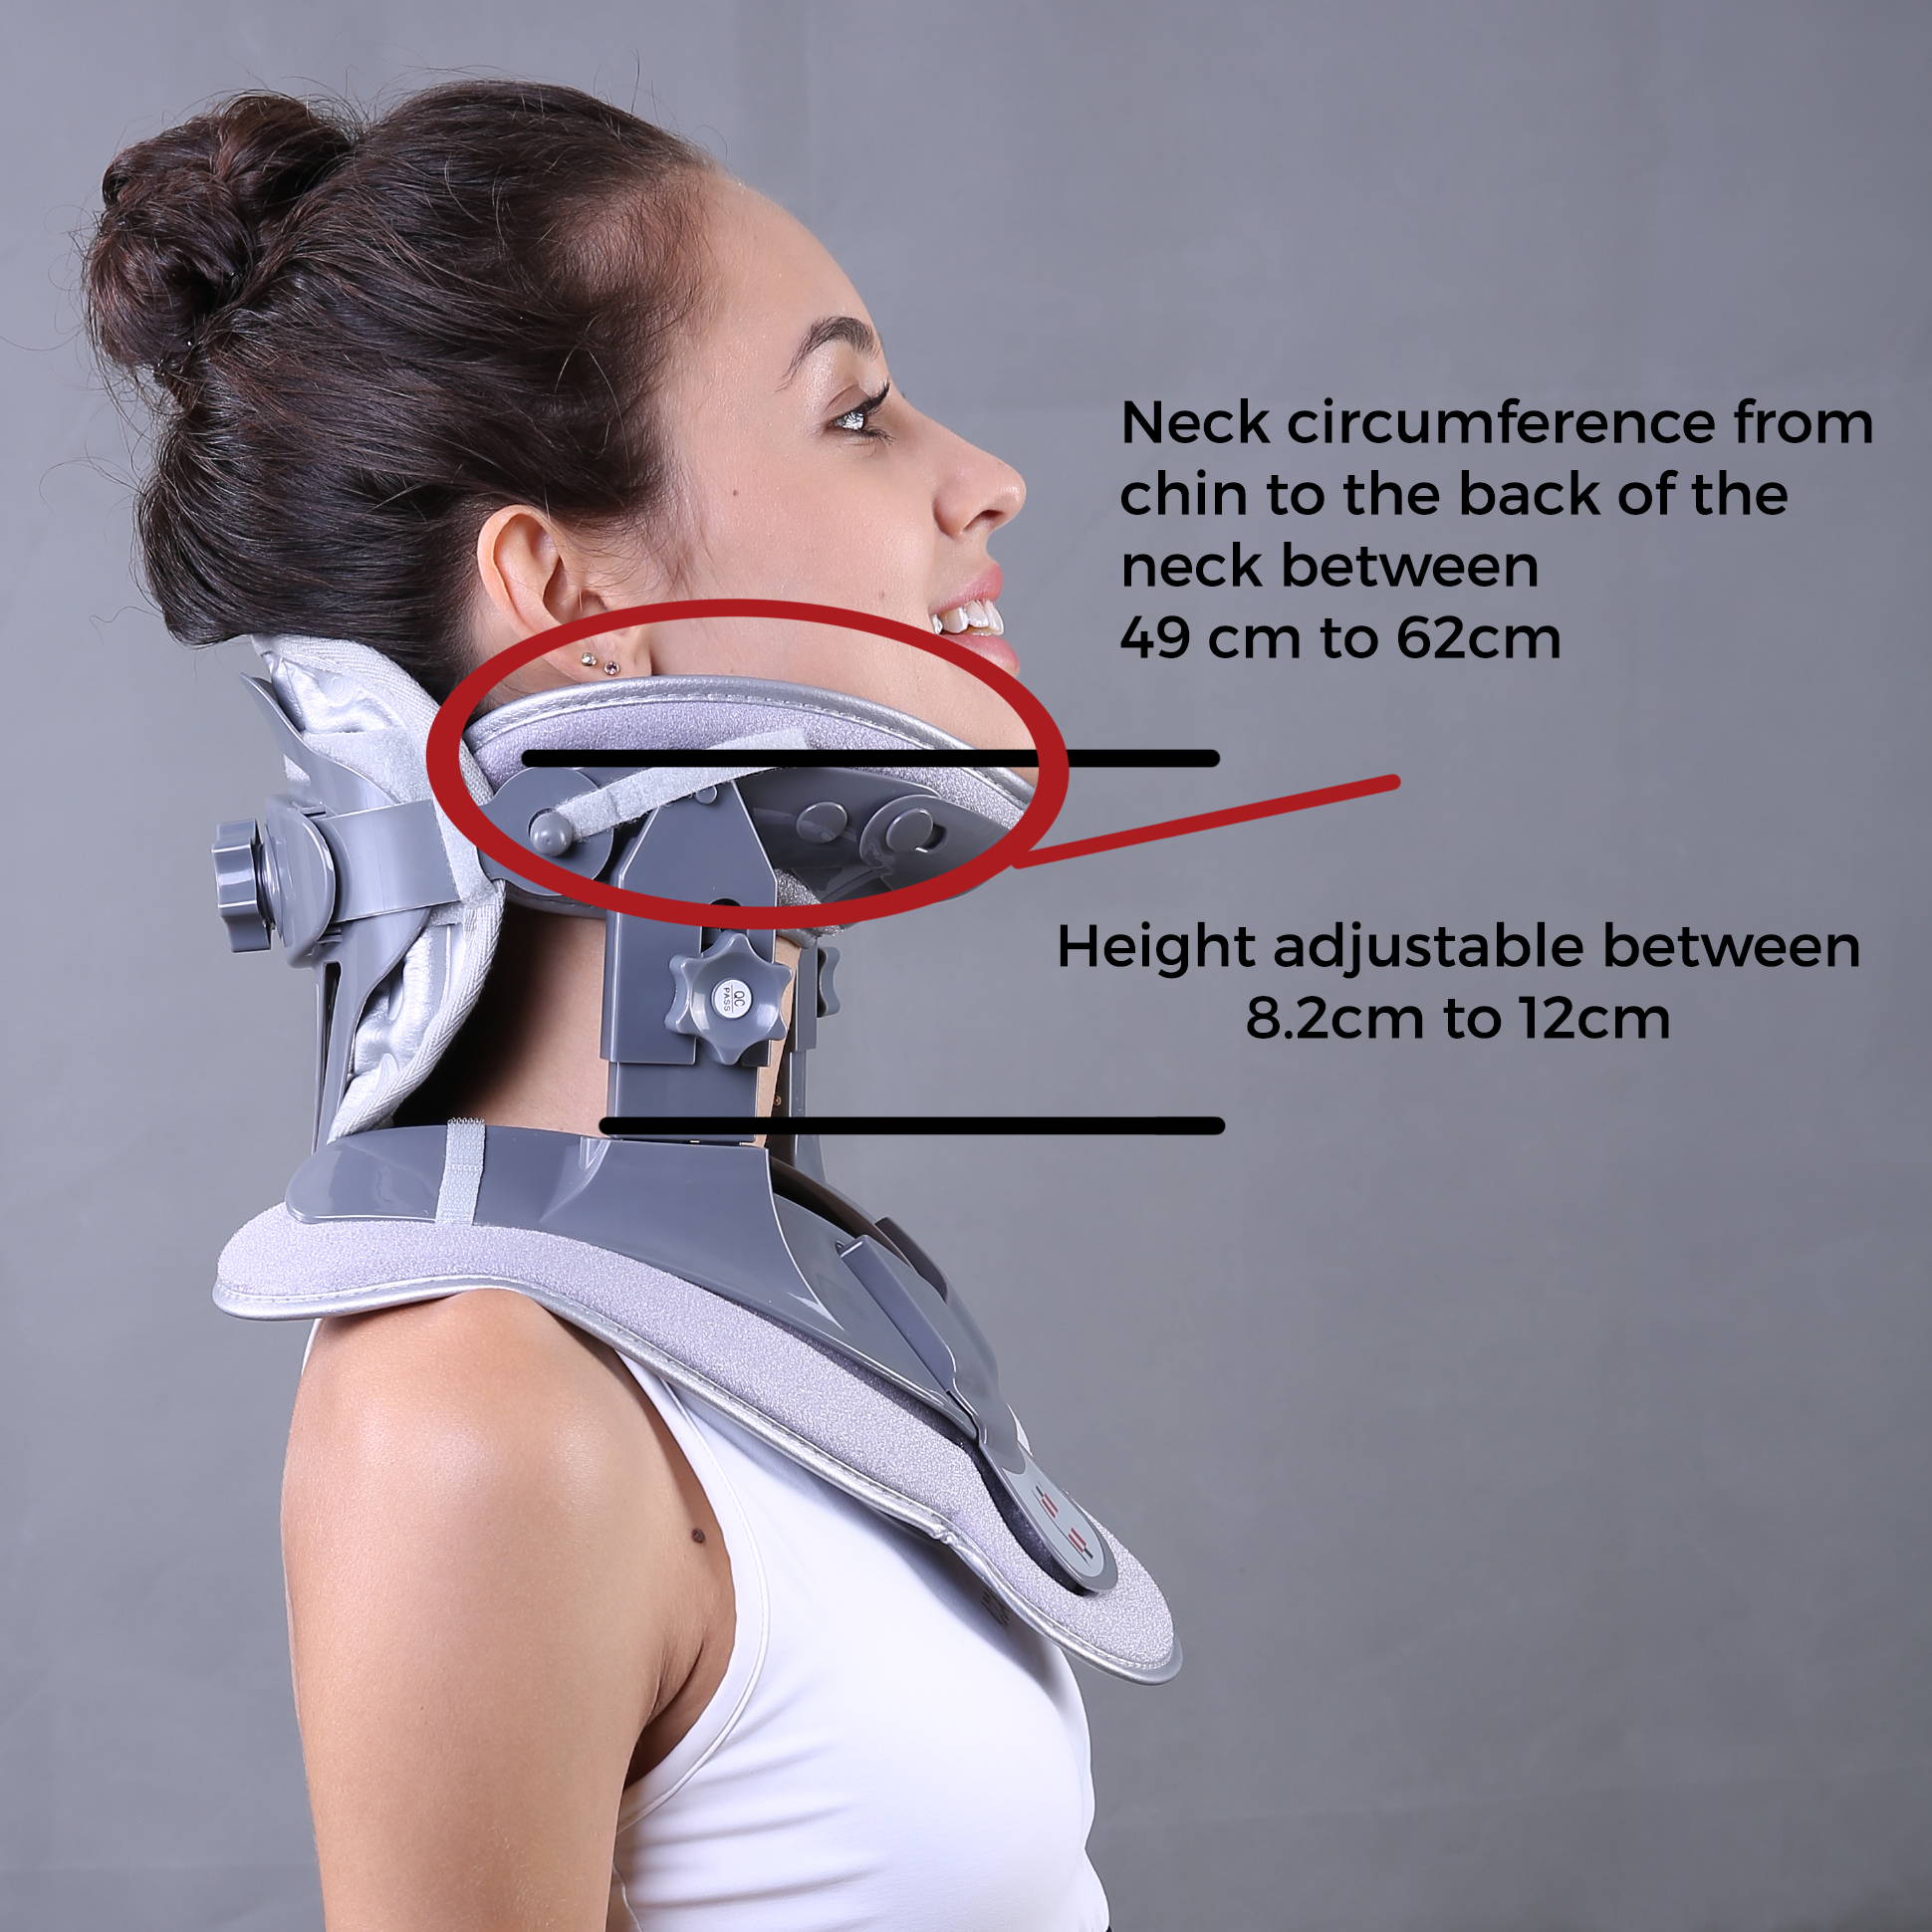 neck traction at home ,  dangers of cervical traction ,  best neck traction device ,  neck traction device for home ,  neck traction device reviews ,  chiropractic neck traction device ,  neck stretcher how to use ,  neck traction at home ,  dangers of cervical traction ,  best neck traction device ,  neck traction device for home ,  neck traction device reviews ,  cervical neck traction device ,  neck cervical traction device ,  best neck traction device ,  home neck traction device ,  neck traction device amazon ,  best neck traction device  ,  neck traction device reviews ,  chiropractic neck traction device ,  saunders neck traction device ,  neck traction device near me ,  cervical neck traction device reviews ,  how to use neck traction device ,  how to use cervical neck traction device ,  branfit neck traction device ,  neck traction device at home ,  neck air traction device ,  neck traction device australia ,  neck traction device uk ,  neck traction device nz USA ,  neck traction device how to use ,  neck traction device reddit ,  neck cloud - cervical traction device ,  neckfix cervical traction device ,  exercises for neck and shoulder pain myofascial pain syndrome how to relieve neck pain from sleeping wrong lump on right side of neck no pain carotidynia occipital neuralgia symptoms fibromyalgia lump on left side of neck no pain trapezius muscle pain trapezius muscle cervicogenic headache physical therapy for neck pain spinal stenosis neck pain in children shoulder and neck pain on right side how to cure neck pain fast neck pain left side back of neck pain neck pain right side neck pain exercises how to cure neck pain fast neck pain treatment types of neck pain female back neck pain neck pain left side neck pain right side neck pain exercises how to cure neck pain fast neck pain treatment best pillow for neck pain neck pain relief pillows for neck pain shoulder and neck pain neck and shoulder pain neck pain left side back of neck pain neck pain right side neck pain and headache neck pain covid neck muscle pain neck pain exercises neck and shoulder pain on left side neck and shoulder pain on right side neck and back of head pain neck pain from sleeping how to cure neck pain fast how to relieve neck pain shoulder and neck pain on right side neck pain treatment how to get rid of neck pain neck and back pain severe neck pain chronic neck pain neck and shoulder pain radiating down arm neck pain after sleepingNeck traction  device , Cervical tractor , cervical traction device , saunders cervical traction device , neck pain relief , neck pain treatment , neck brace , neck hammock , neckk traction brace , effective neck pain relief , fast neck pain relief 